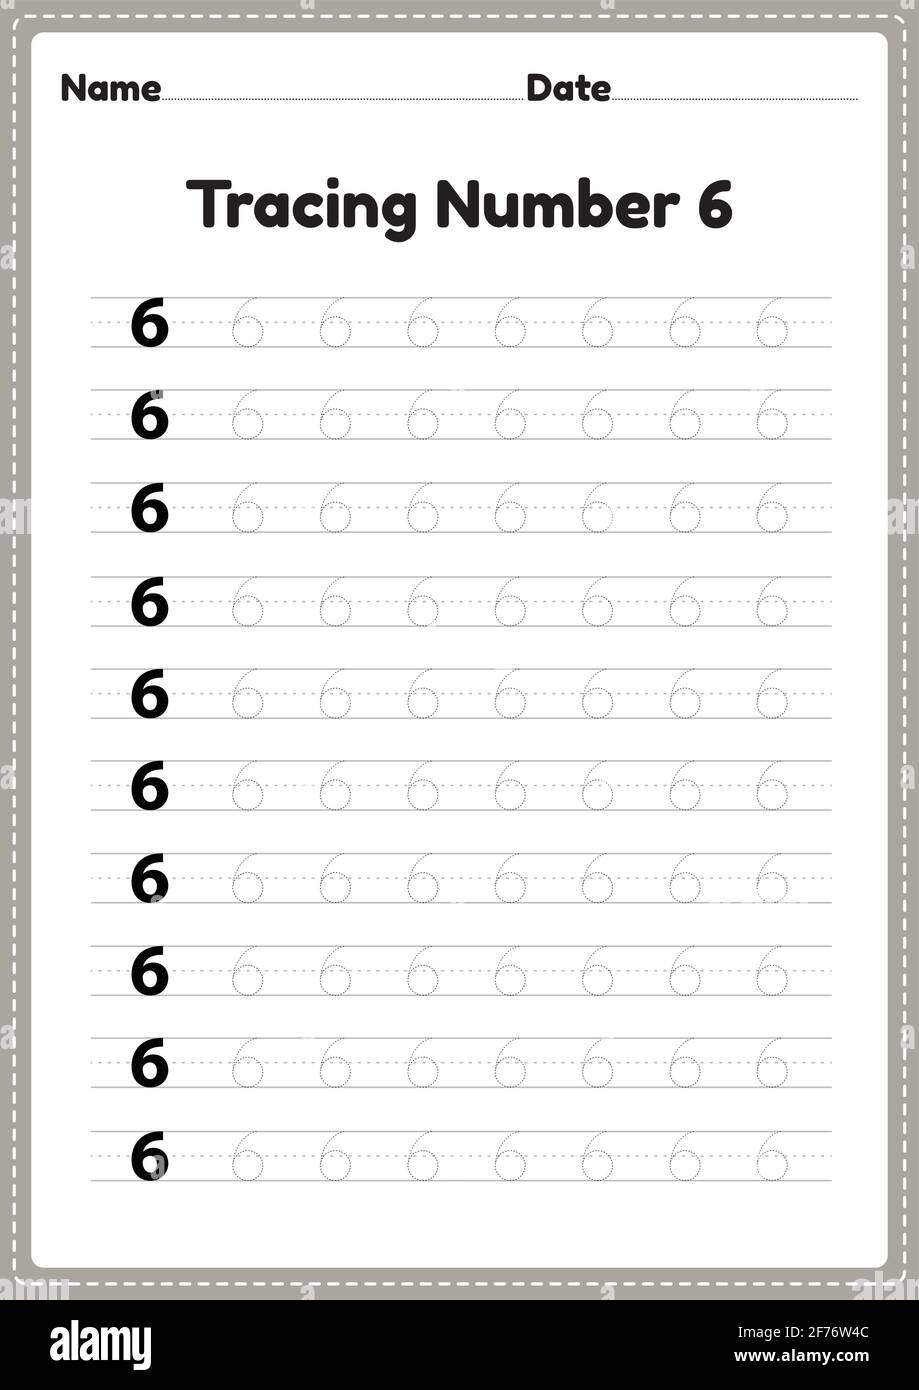 Tracing number 6 worksheet for kindergarten and preschool kids for educational handwriting practice in a printable page. Stock Vector